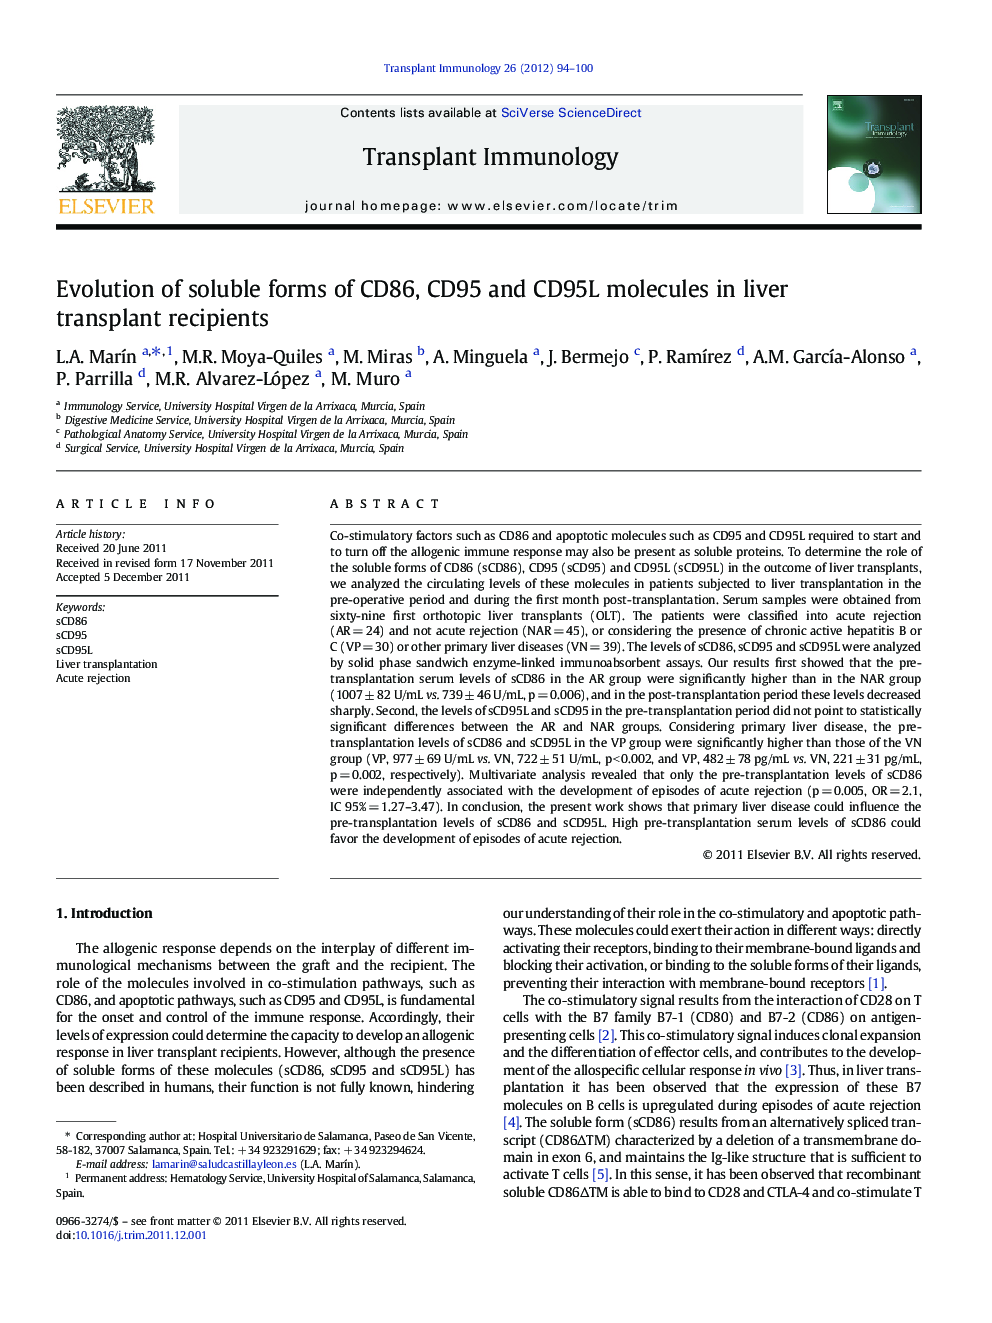 Evolution of soluble forms of CD86, CD95 and CD95L molecules in liver transplant recipients